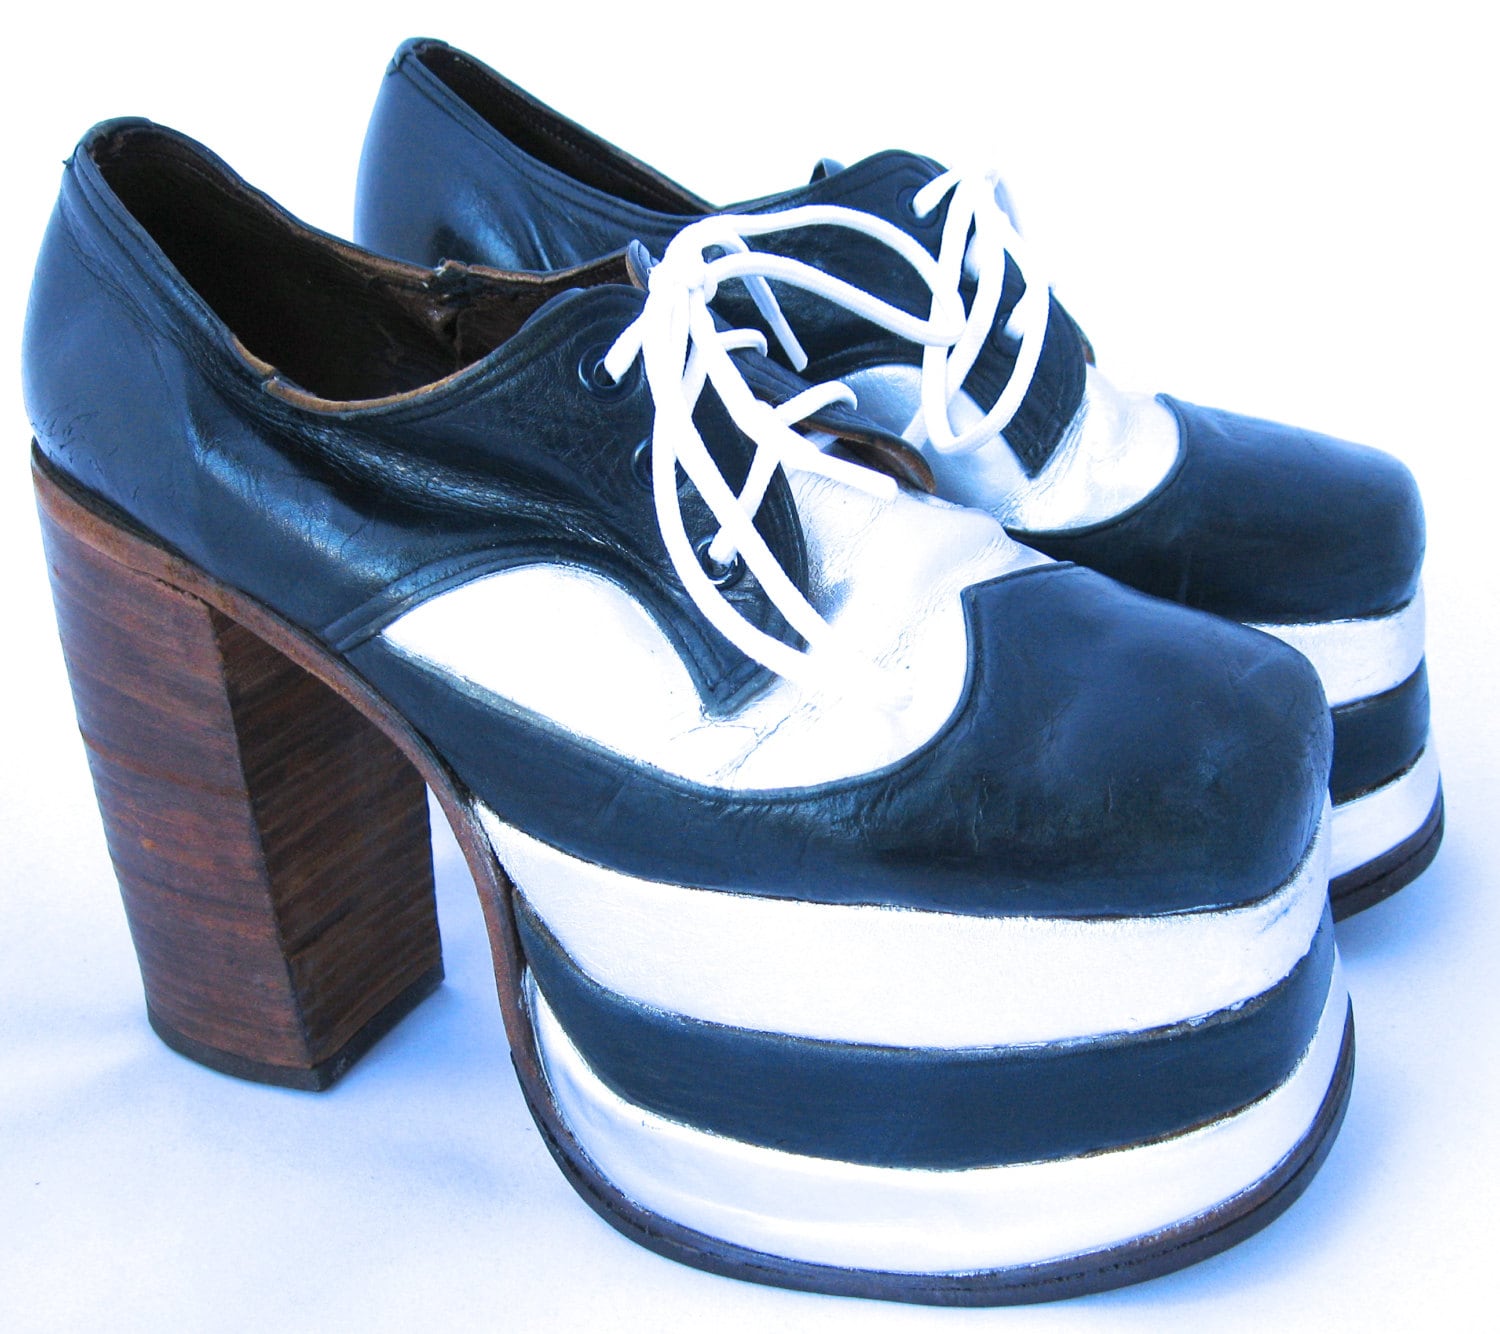 Most Popular Shoes In The 70 S - Best Design Idea